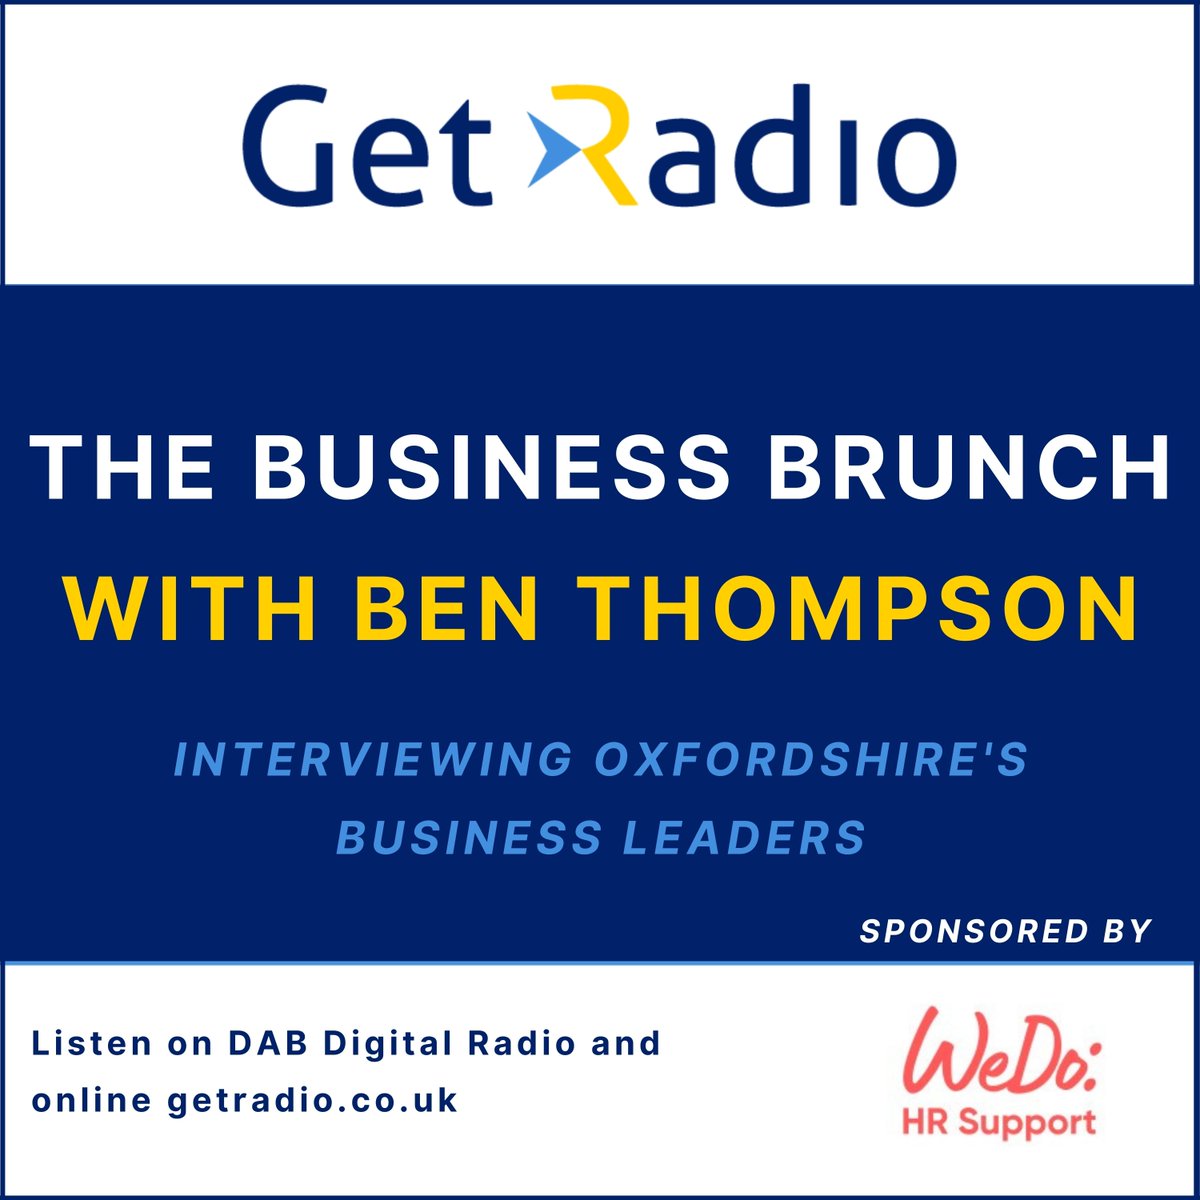 🍽️ This week on the Business Brunch, @benthompson2305 will dive into the world of hospitality with special guests @stevesanderson4 of The Chequers at Burcot and Lee Wood from Leonardo Royal Hotel!
Tune in this Sunday at 11am!
#BusinessBrunch #Oxfordshire #Oxford #GetRadio